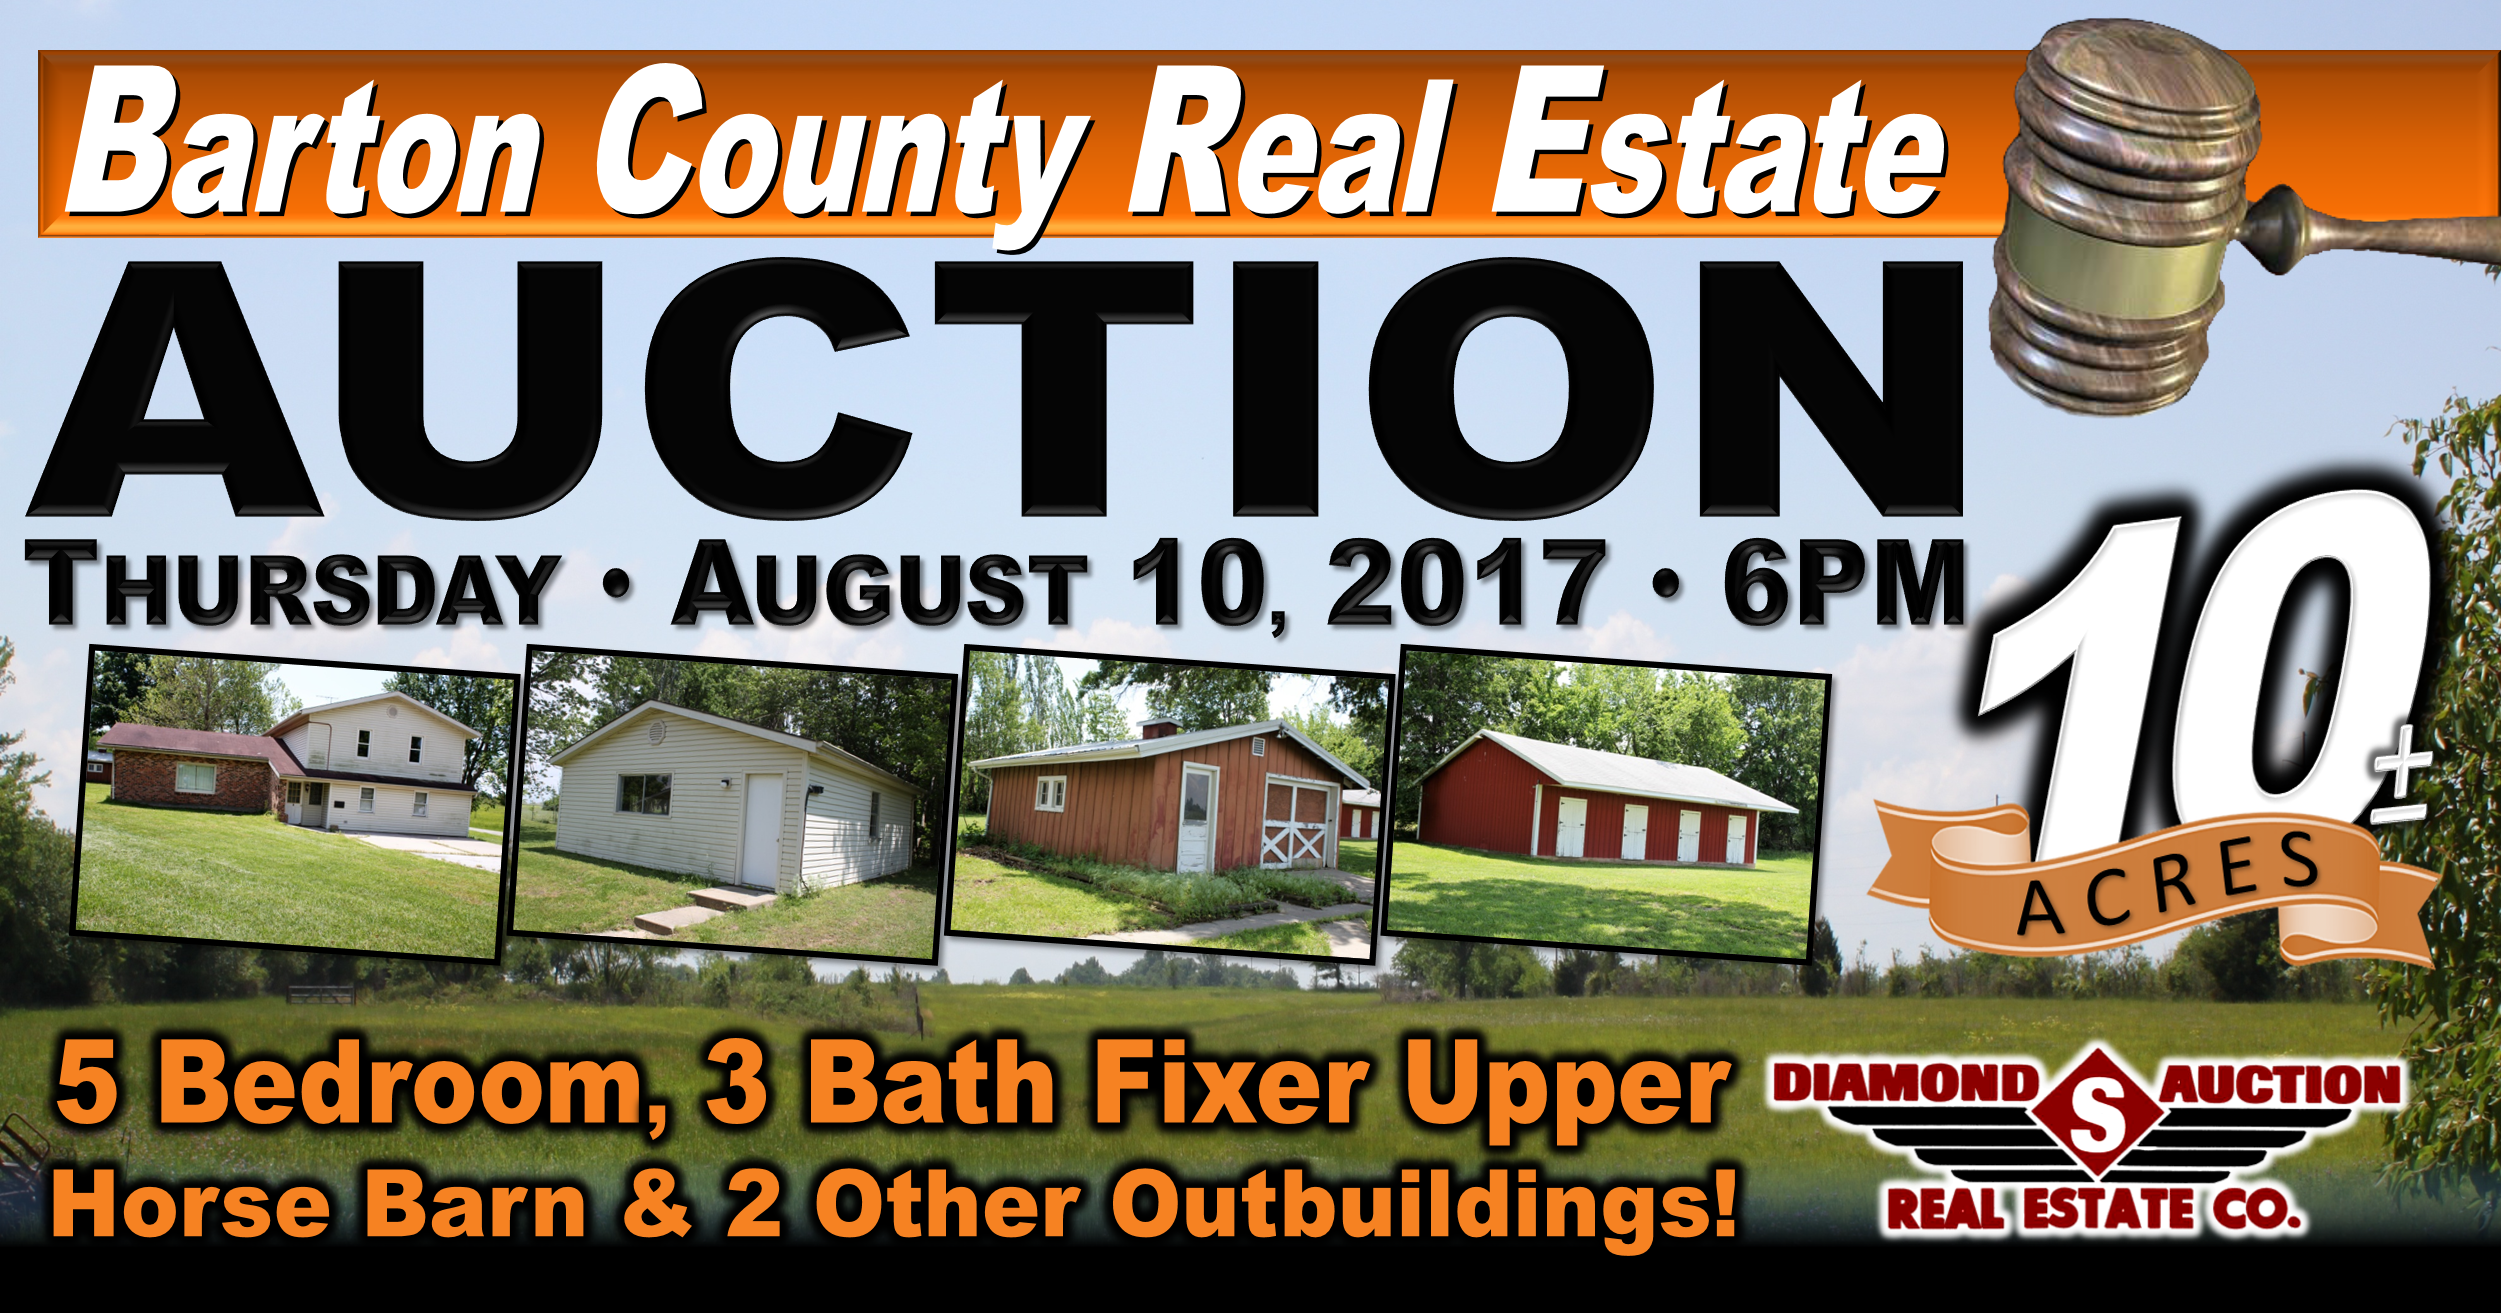 BARTON COUNTY REAL ESTATE AUCTION